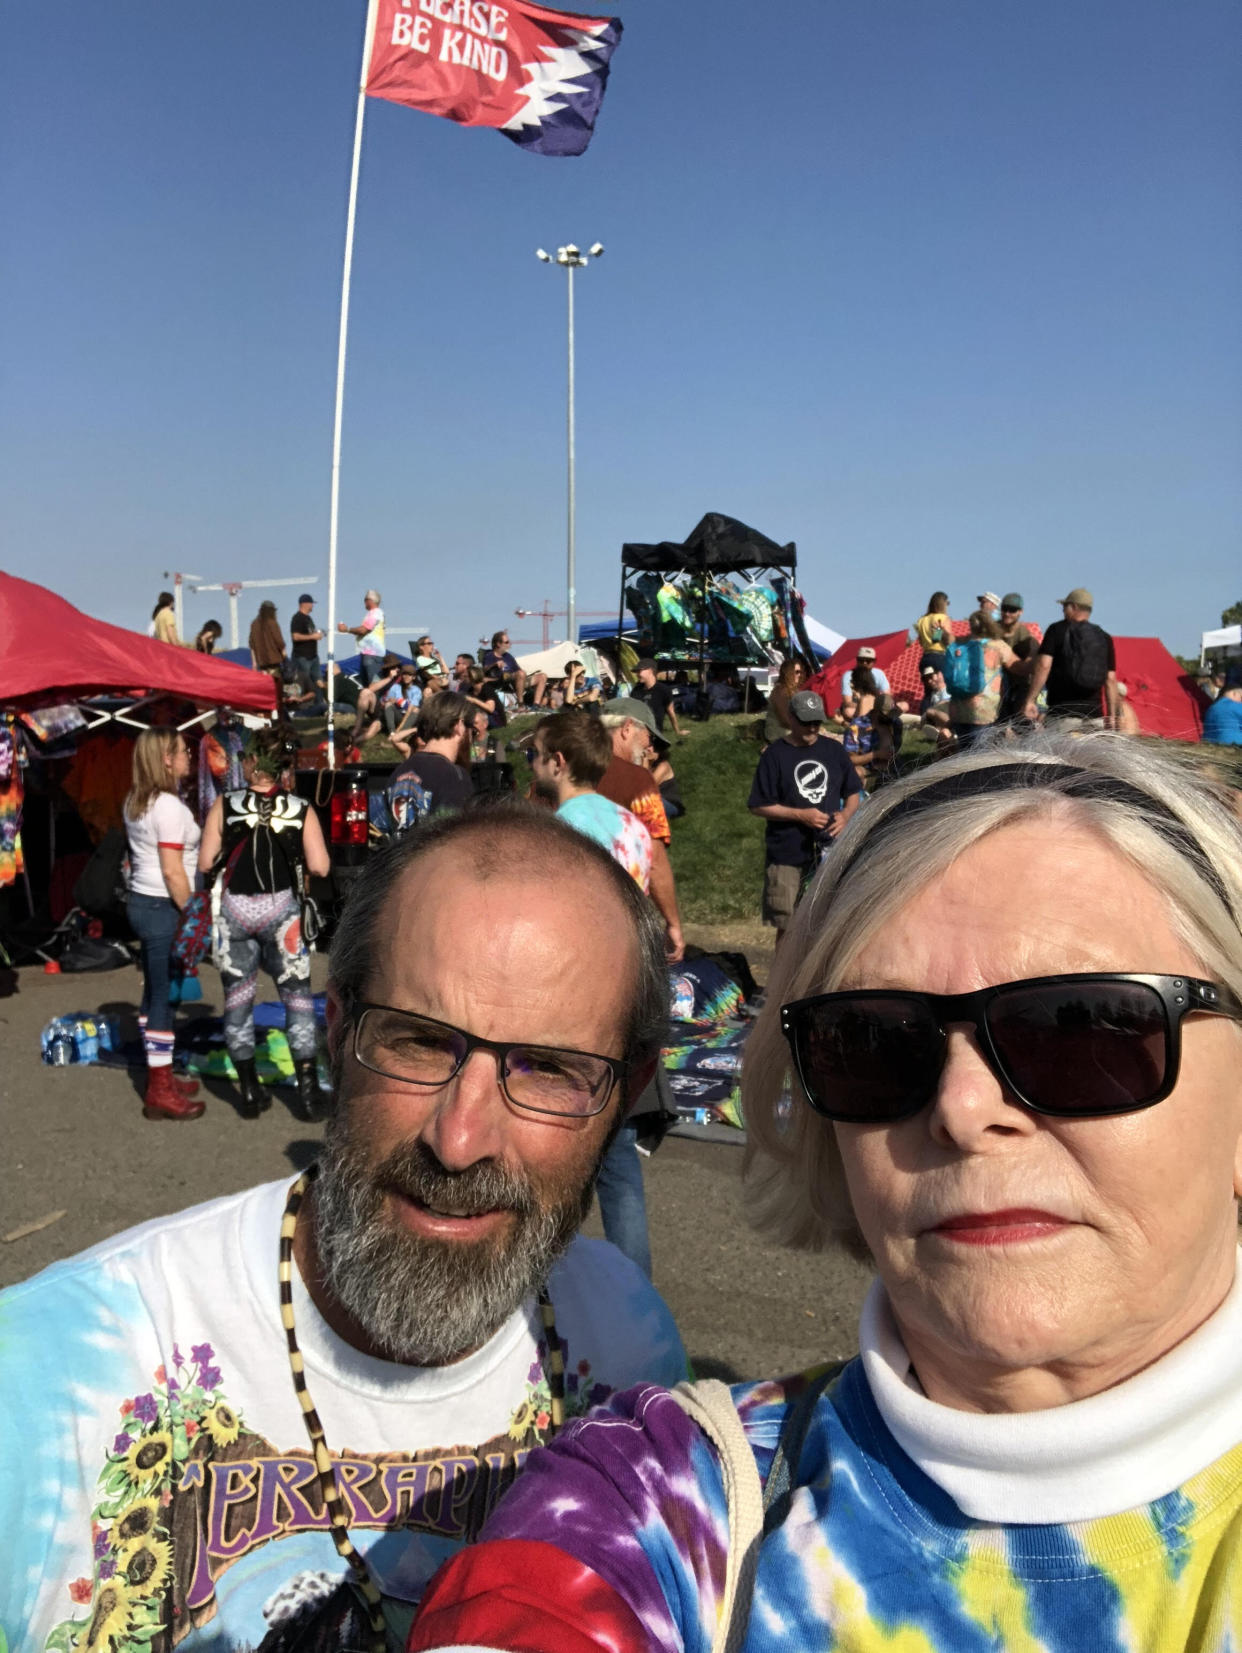 Matt and Judy on Shakedown Alley at the Dead &amp; Company show at Shoreline Amphitheater in Mountain View, California, in July 2018. (Photo: Courtesy of Judy Nelson)